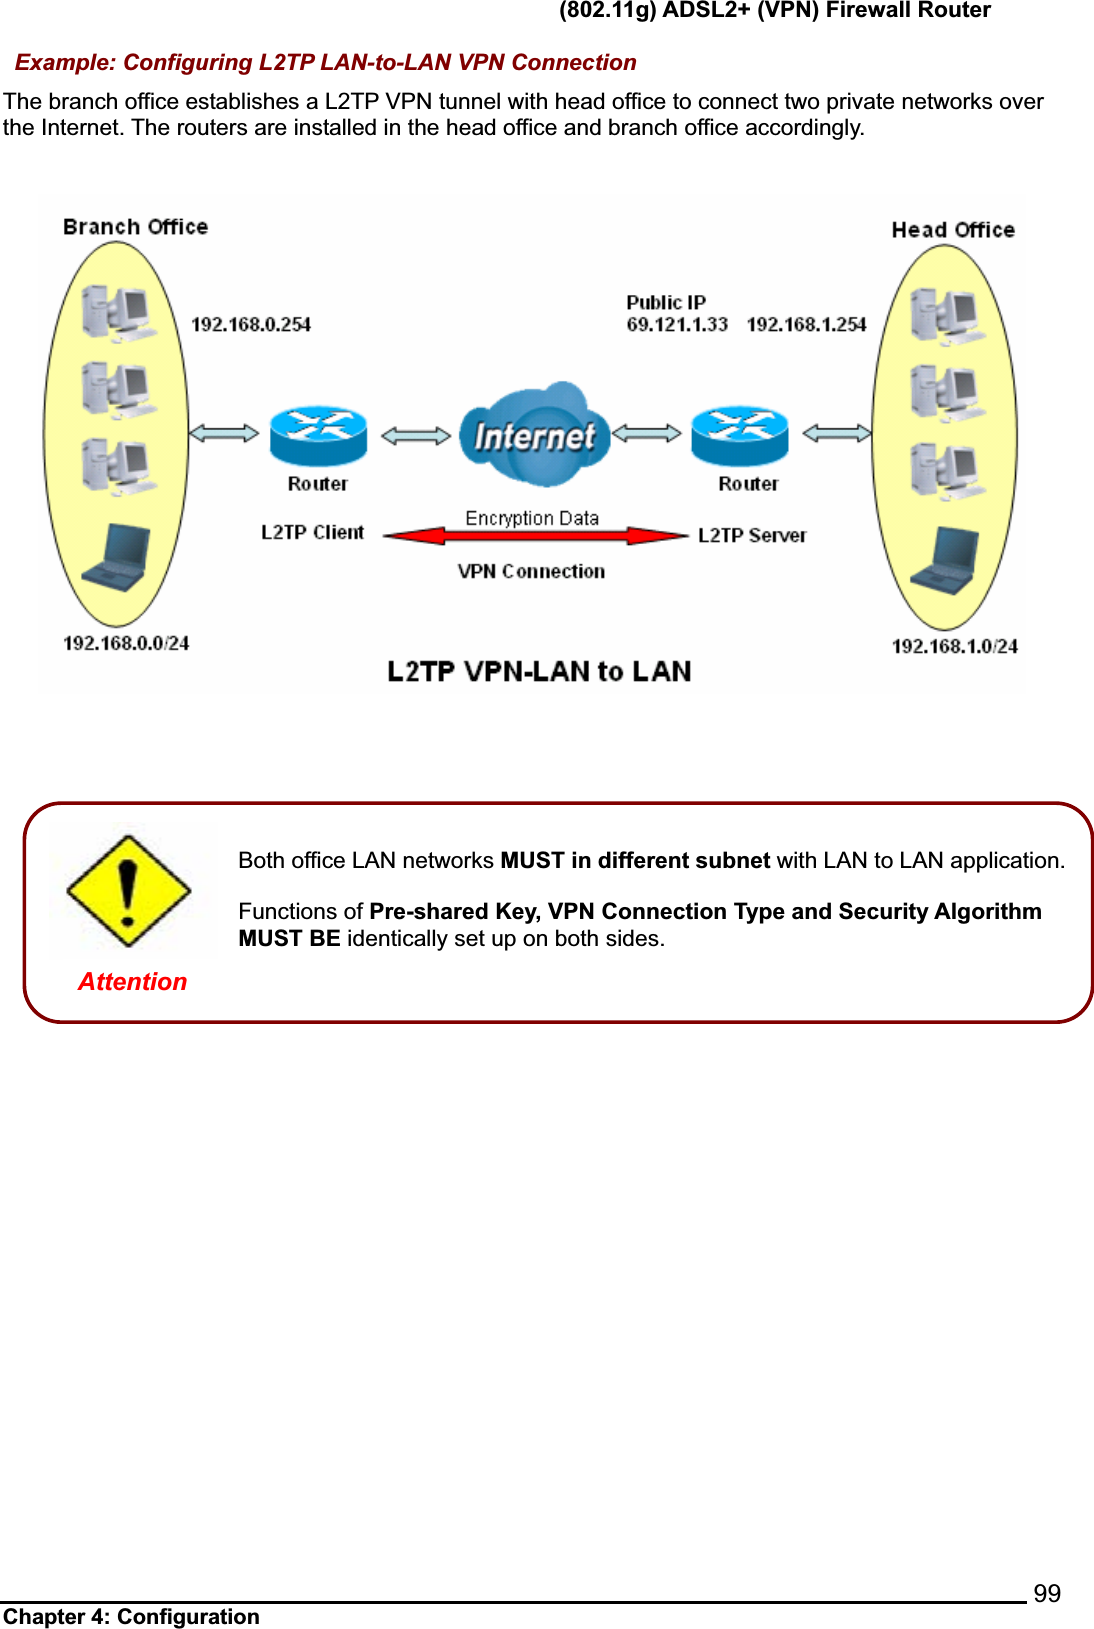      (802.11g) ADSL2+ (VPN) Firewall Router Chapter 4: Configuration    99  Example: Configuring L2TP LAN-to-LAN VPN Connection   The branch office establishes a L2TP VPN tunnel with head office to connect two private networks over the Internet. The routers are installed in the head office and branch office accordingly.Both office LAN networks MUST in different subnet with LAN to LAN application.Functions of Pre-shared Key, VPN Connection Type and Security Algorithm MUST BE identically set up on both sides. Attention